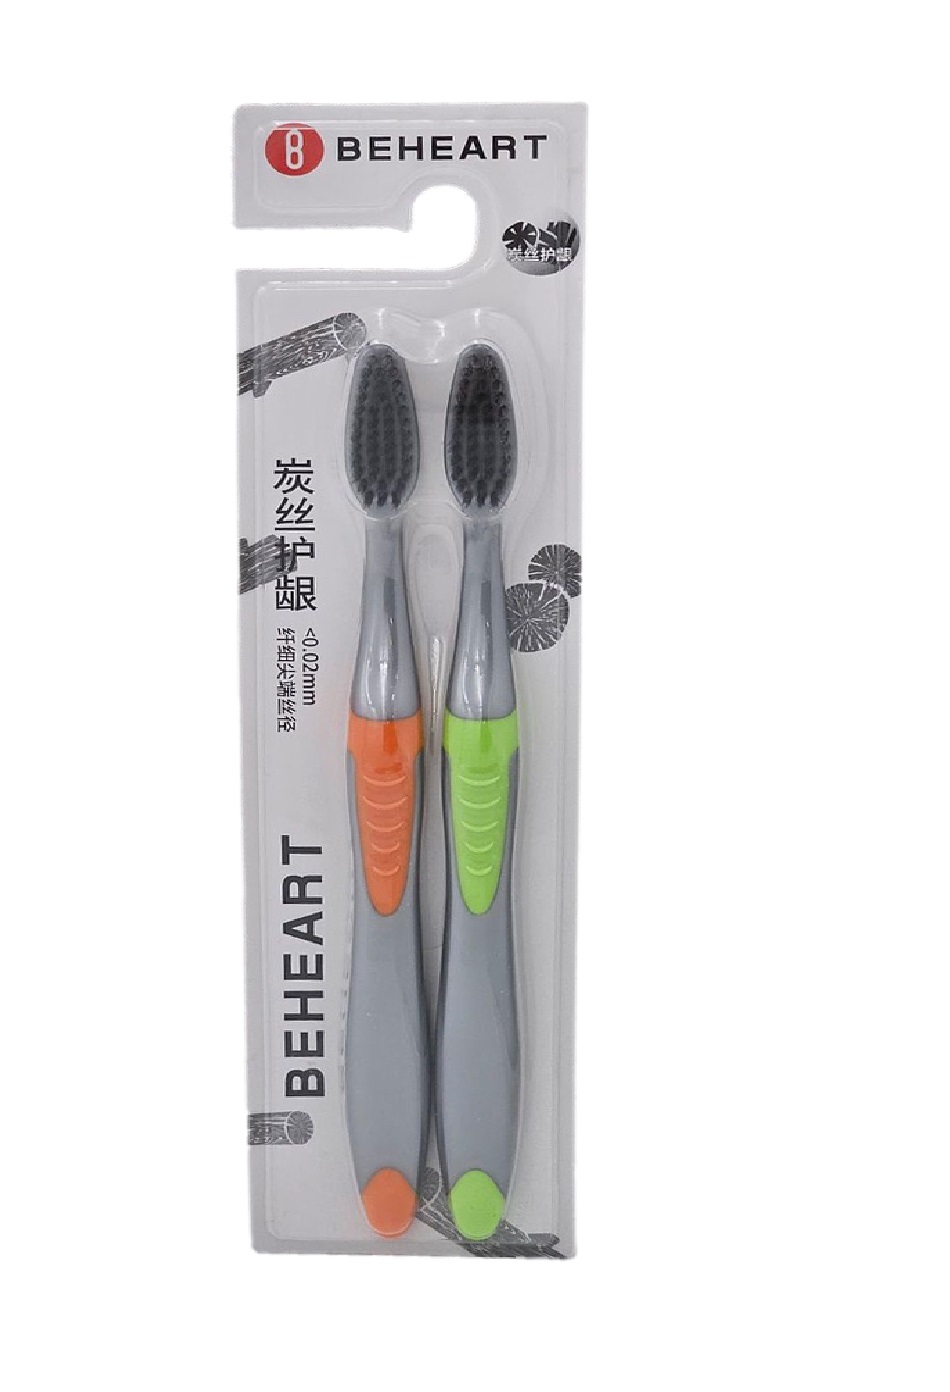 Зубные щетки Beheart Carbon Wire Gingival Protection Toothbrush T101, 2 шт зубная щетка xiaomi doctor b toothbrush youth edition серый